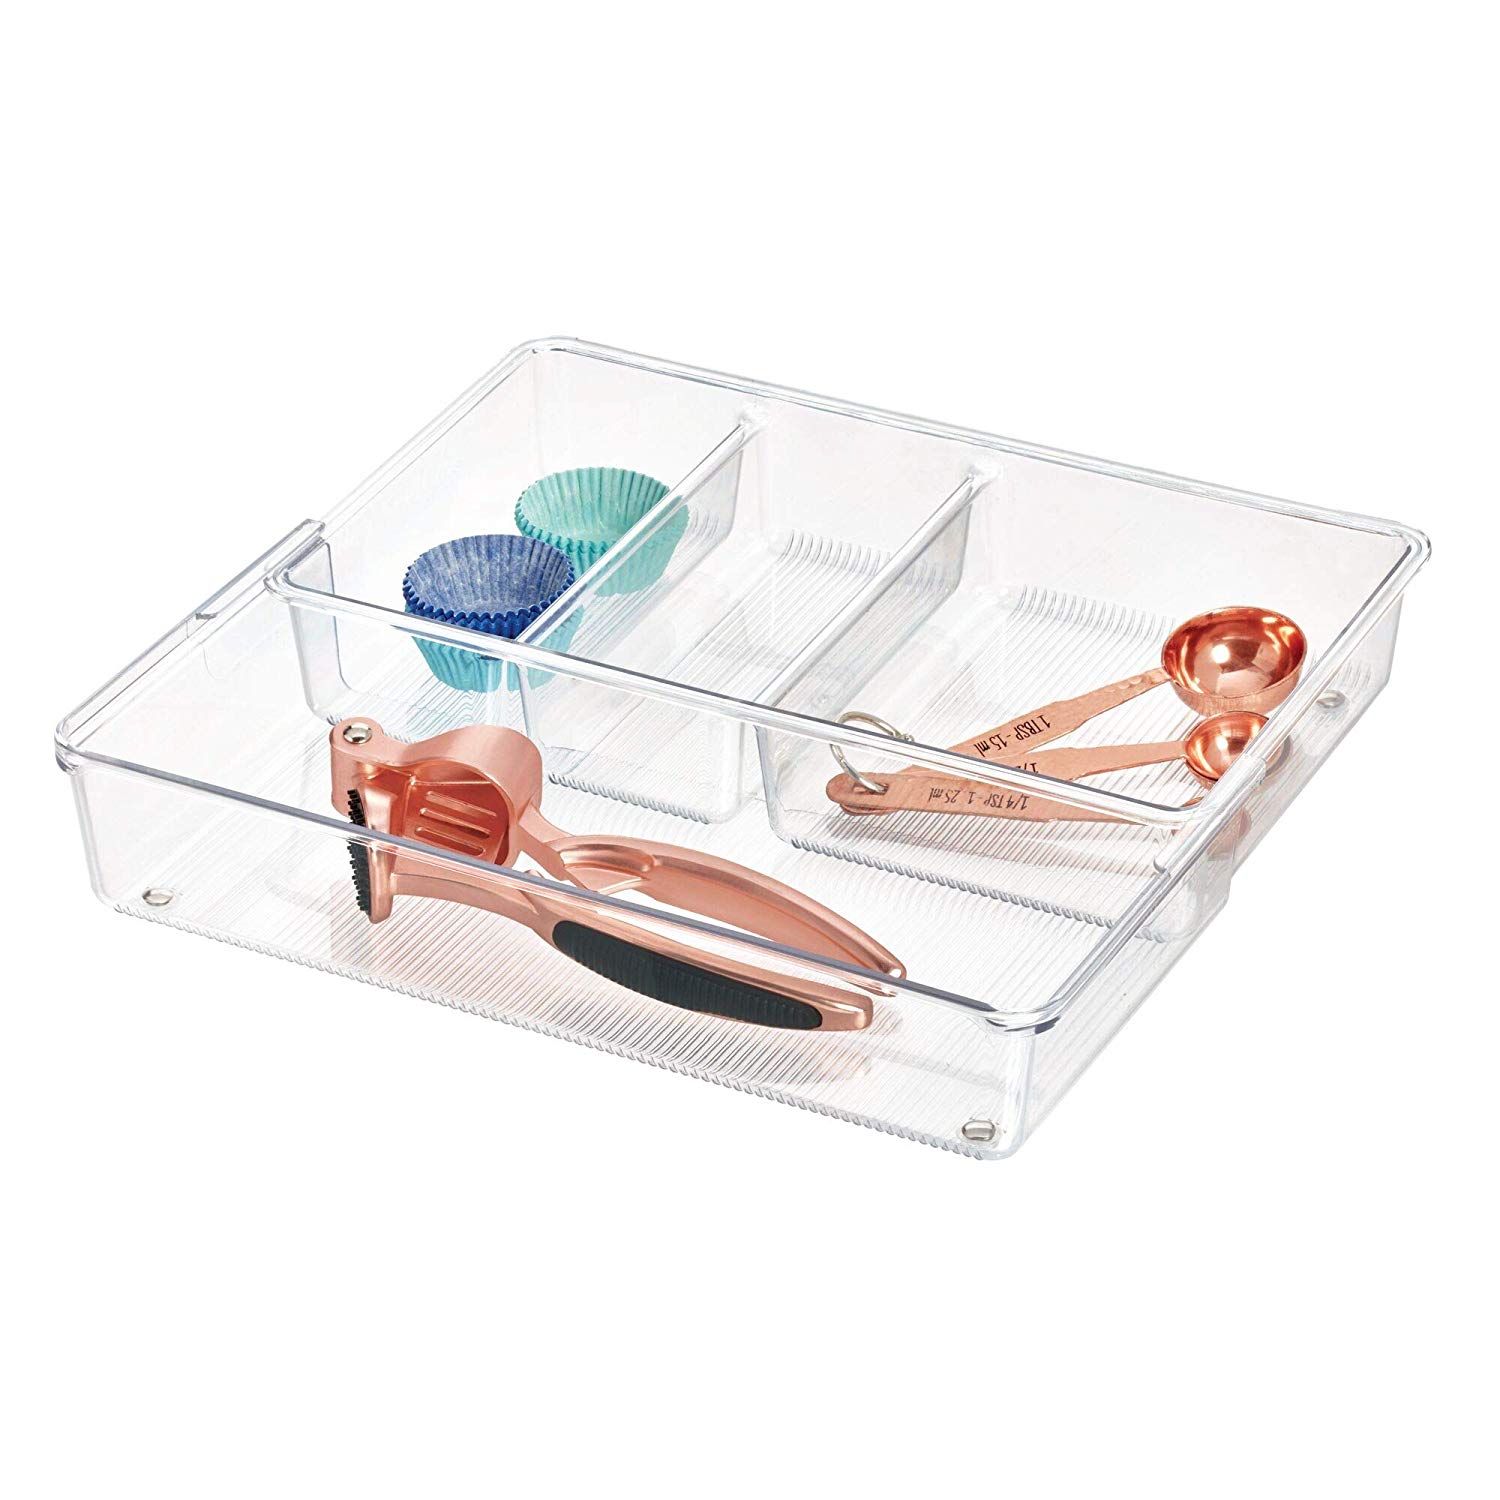 2 Inch High Linus Drawer Organizers Storables